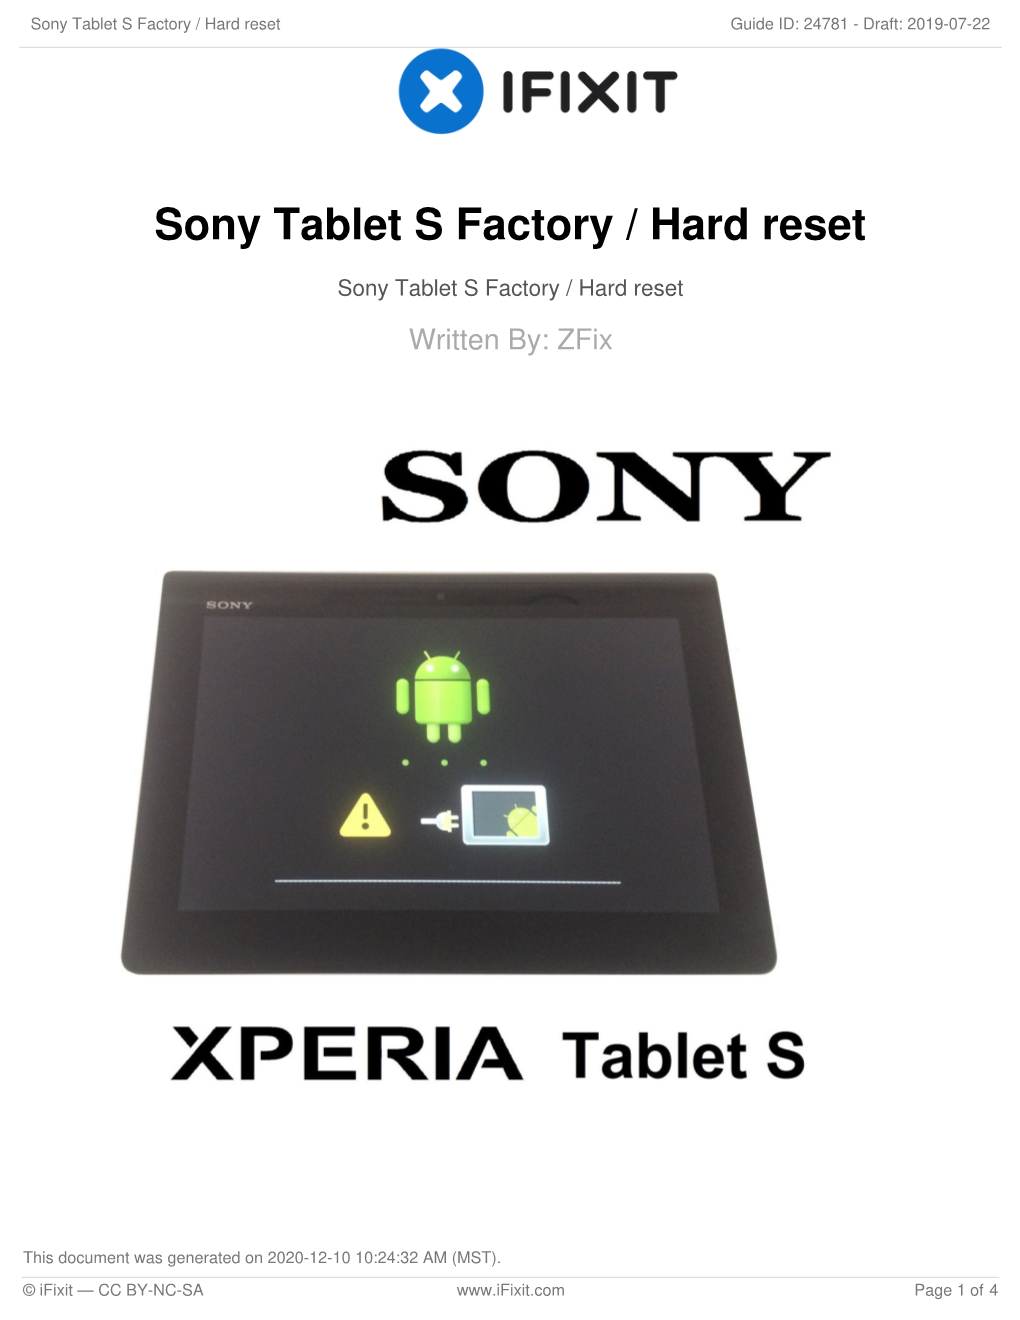 Sony Tablet S Factory / Hard Reset Guide ID: 24781 - Draft: 2019-07-22